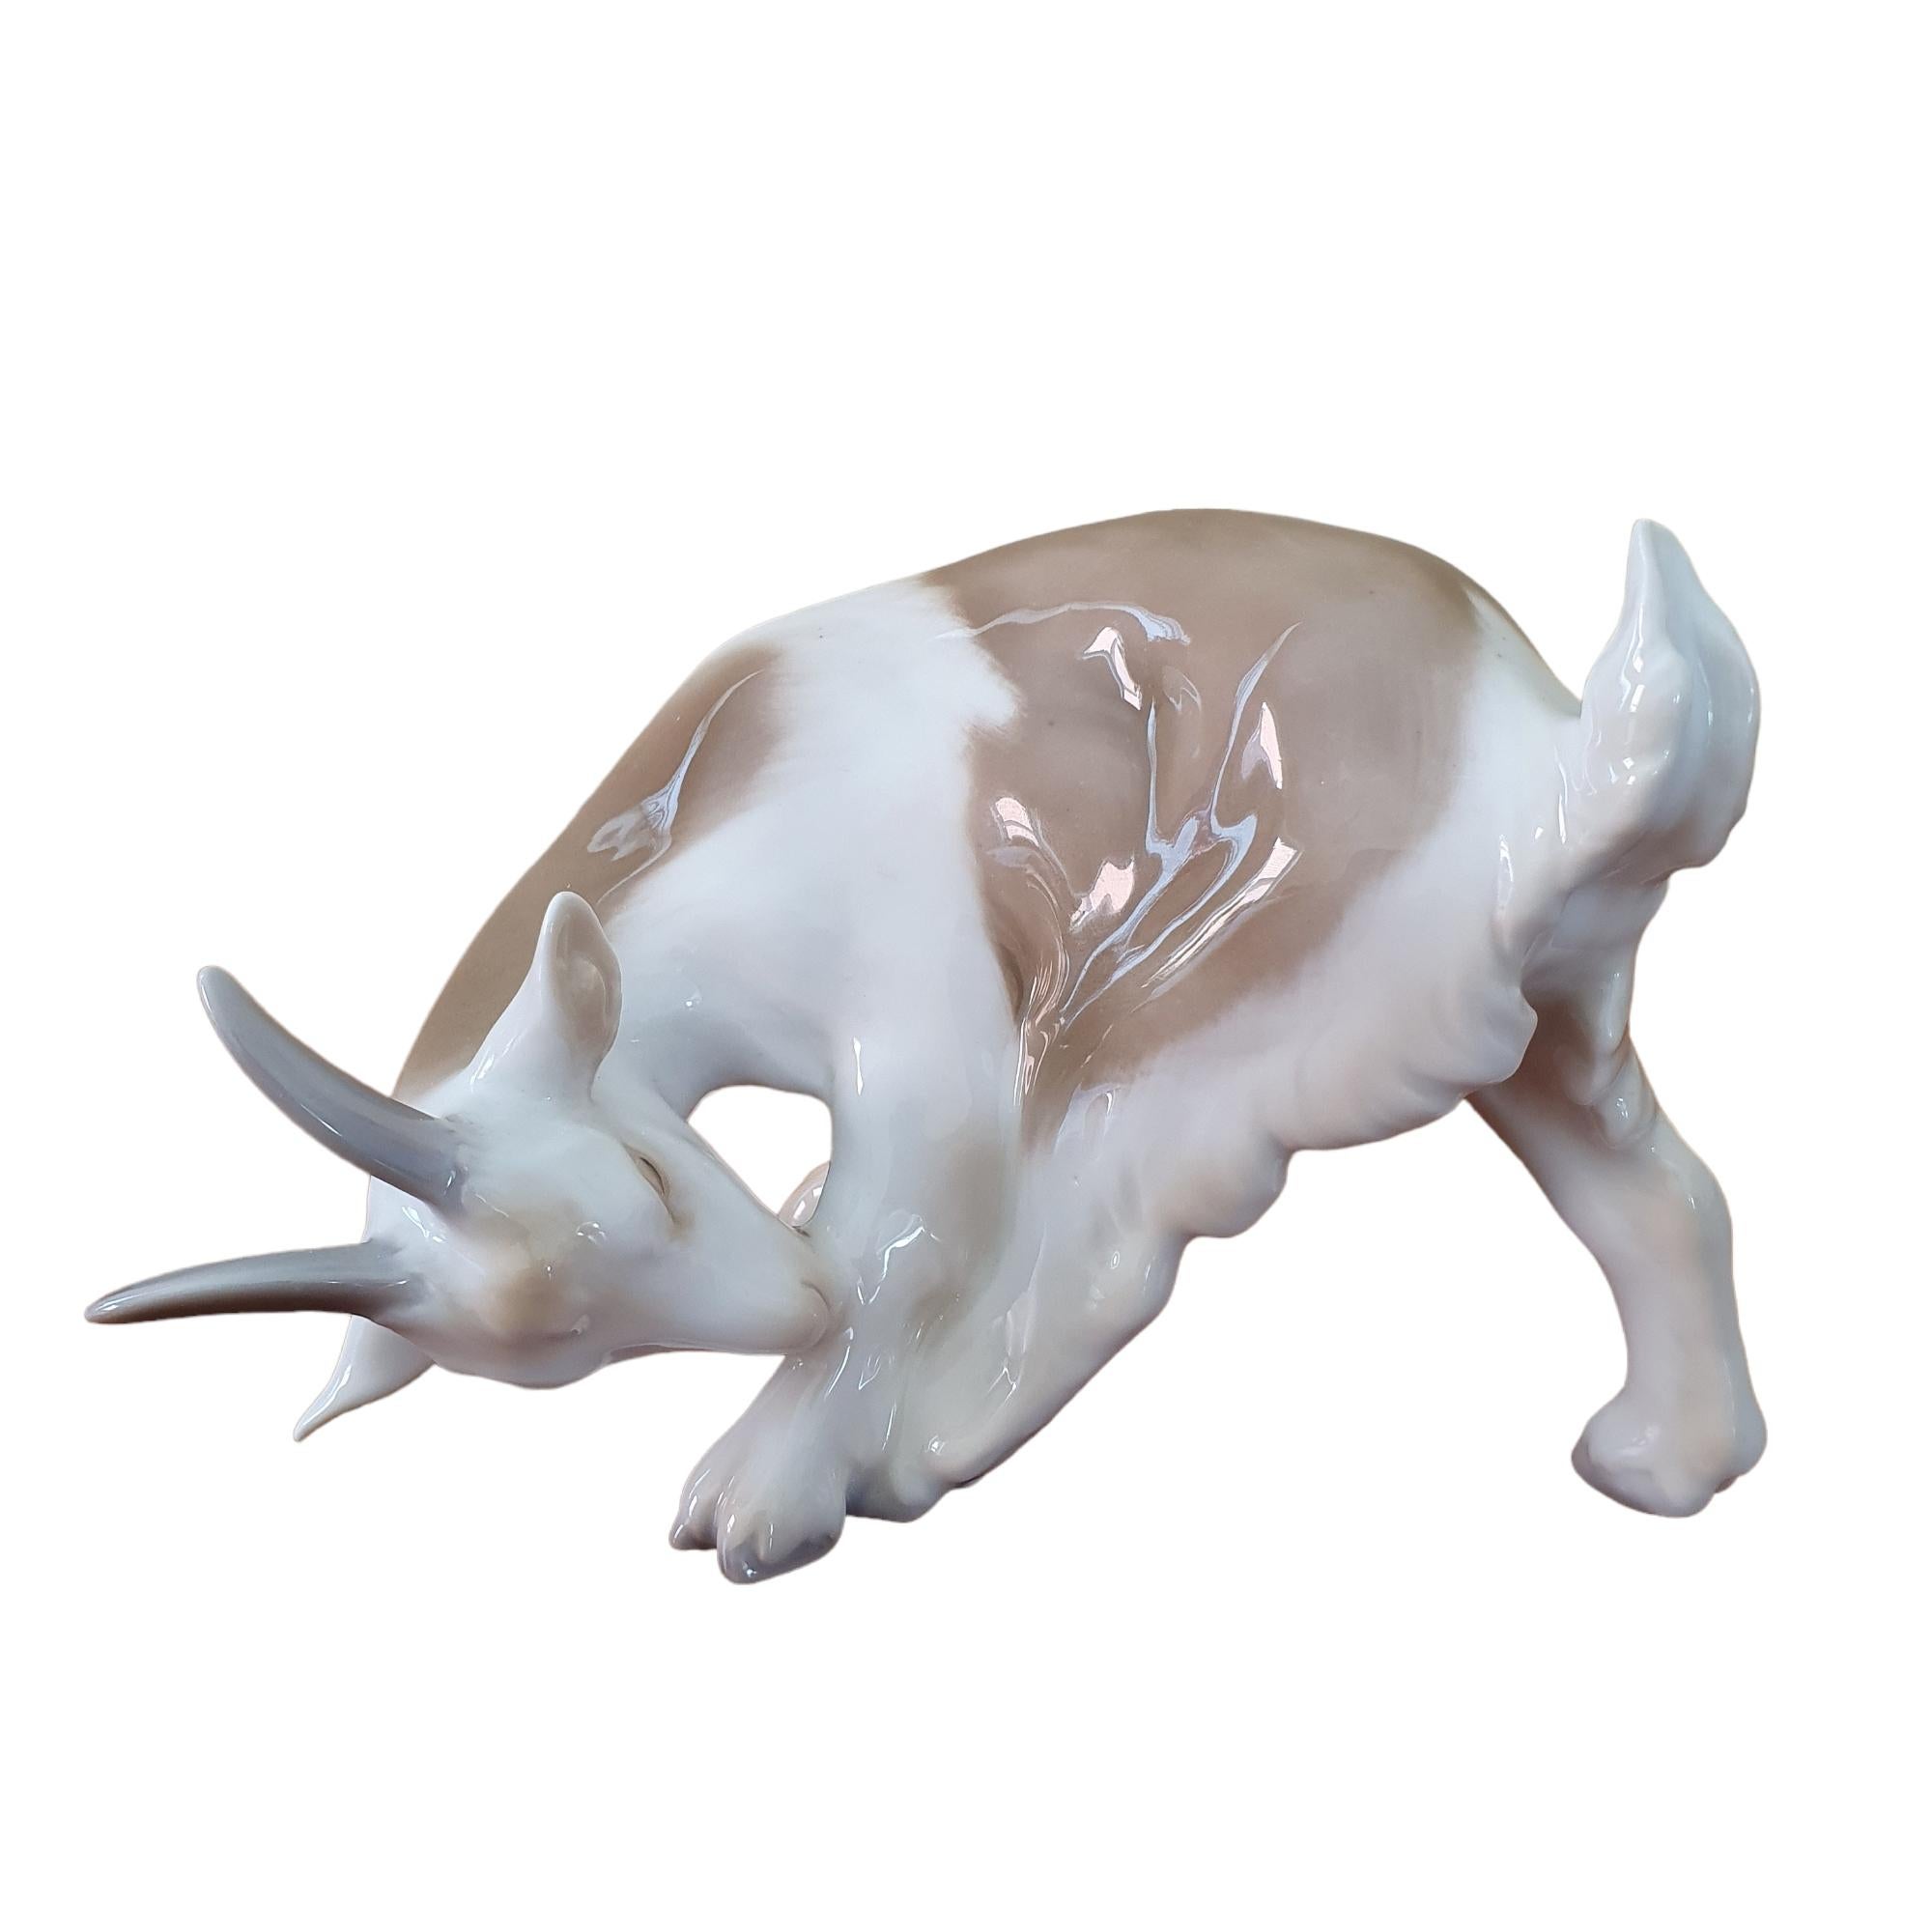 A pair of 20th Century Porcelain Goats by Bing & Grøndahl For Sale 10